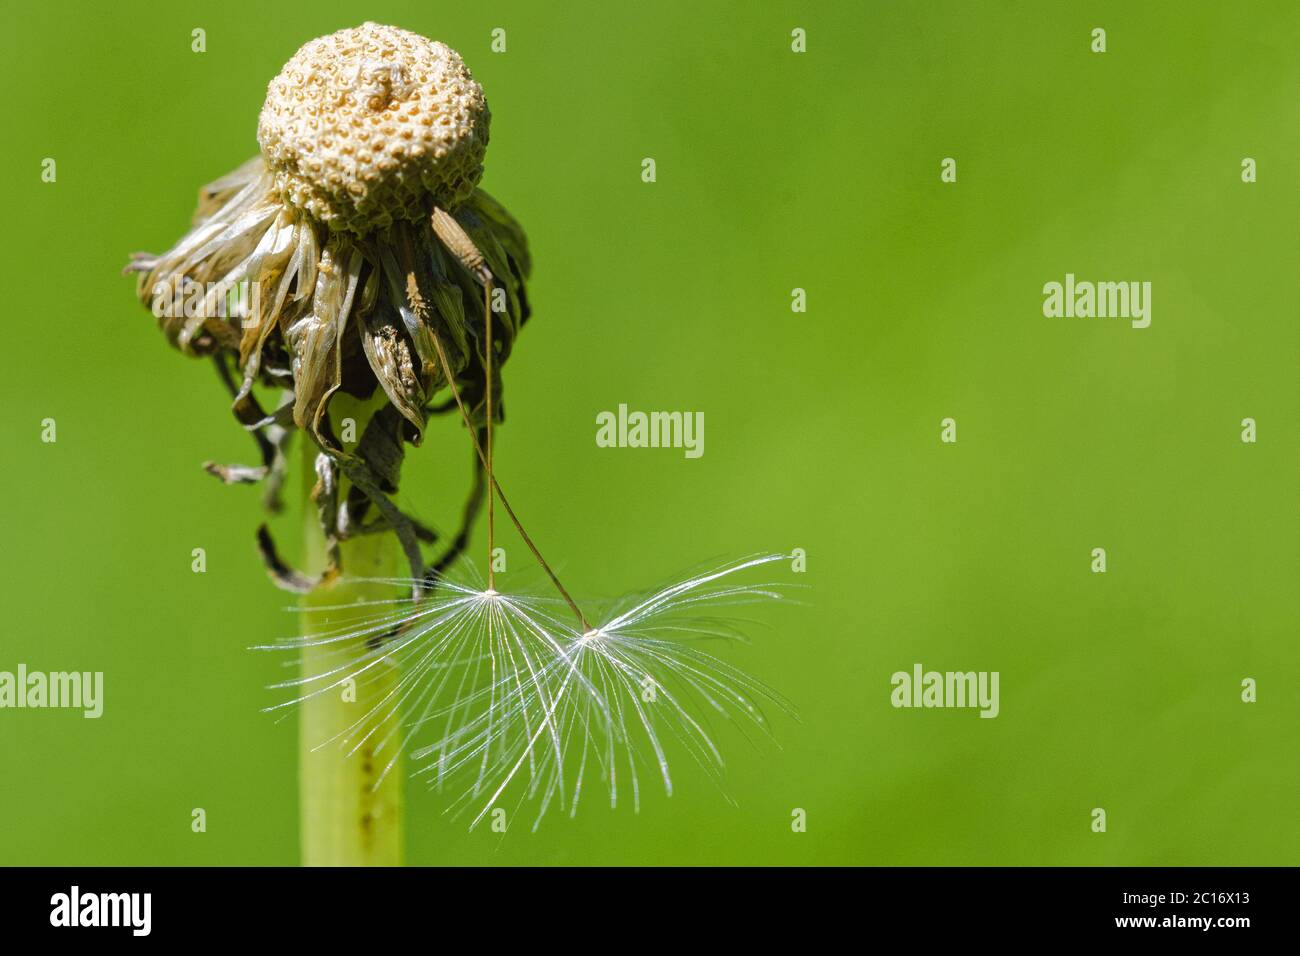 Dandelion with seeds on a blurred background Stock Photo